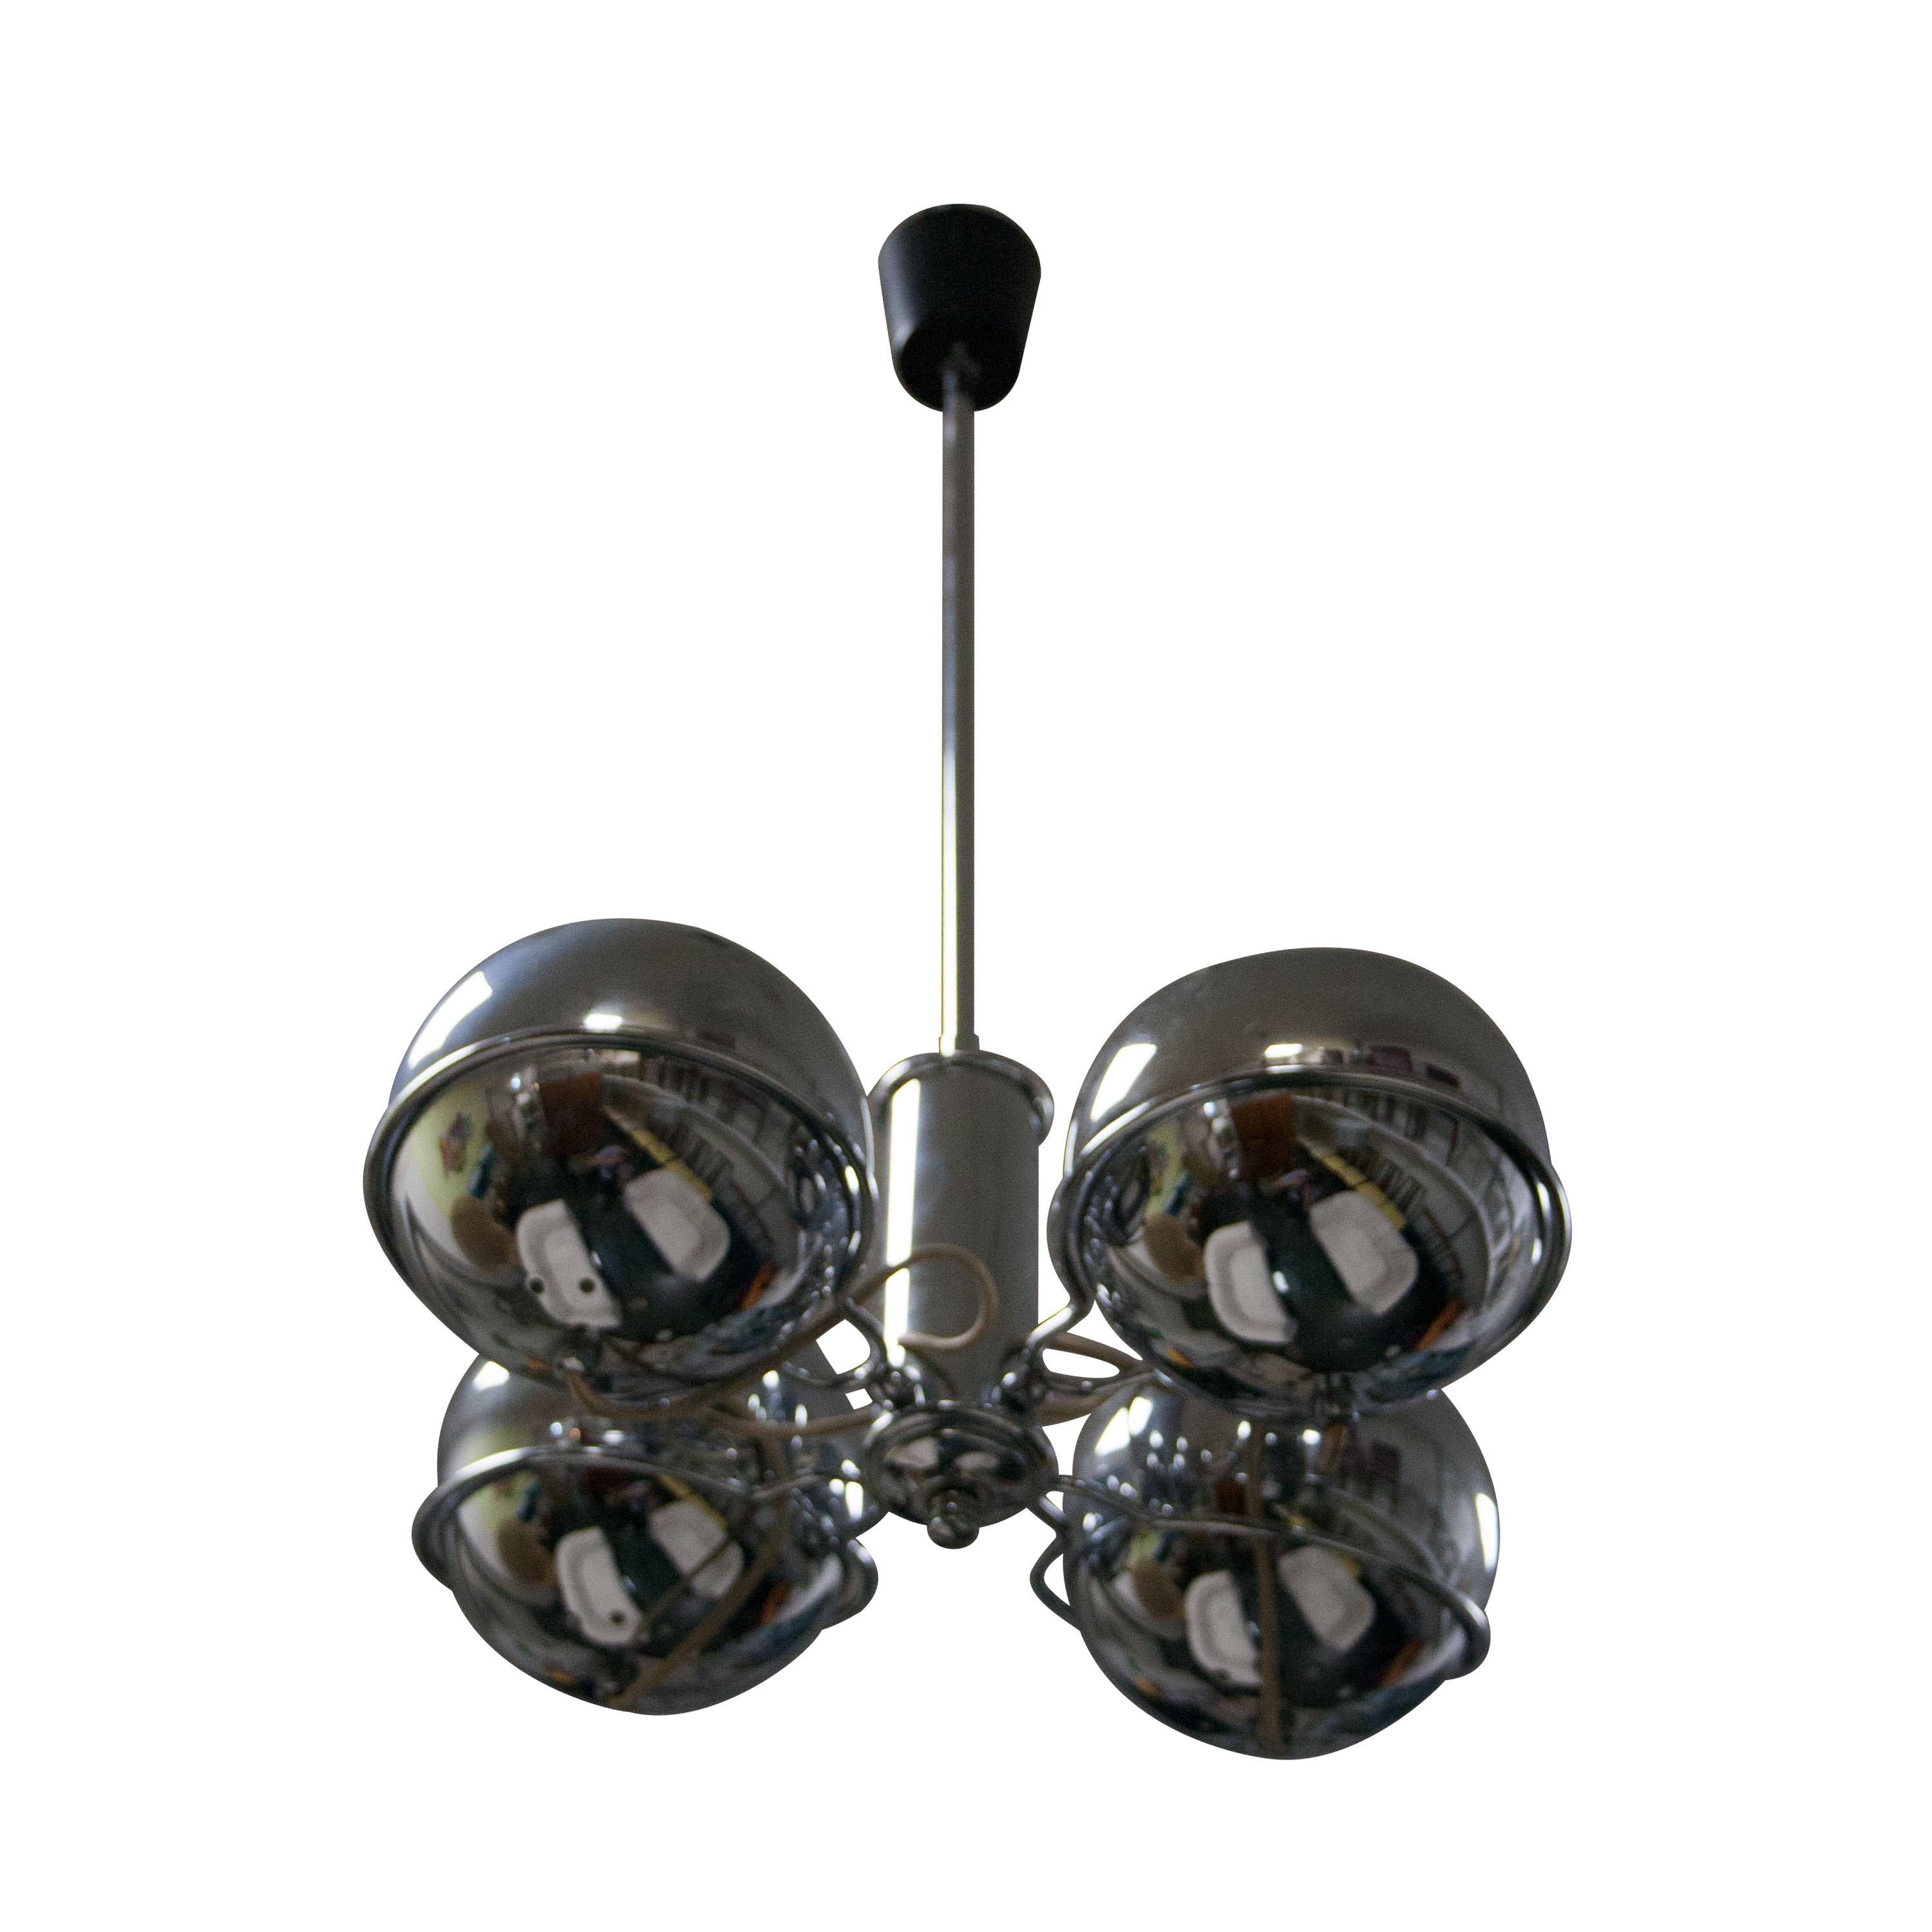 Chromed steel ceiling lamp composed by four spheres laying on a structure which allows light redirectioning. Four light points.